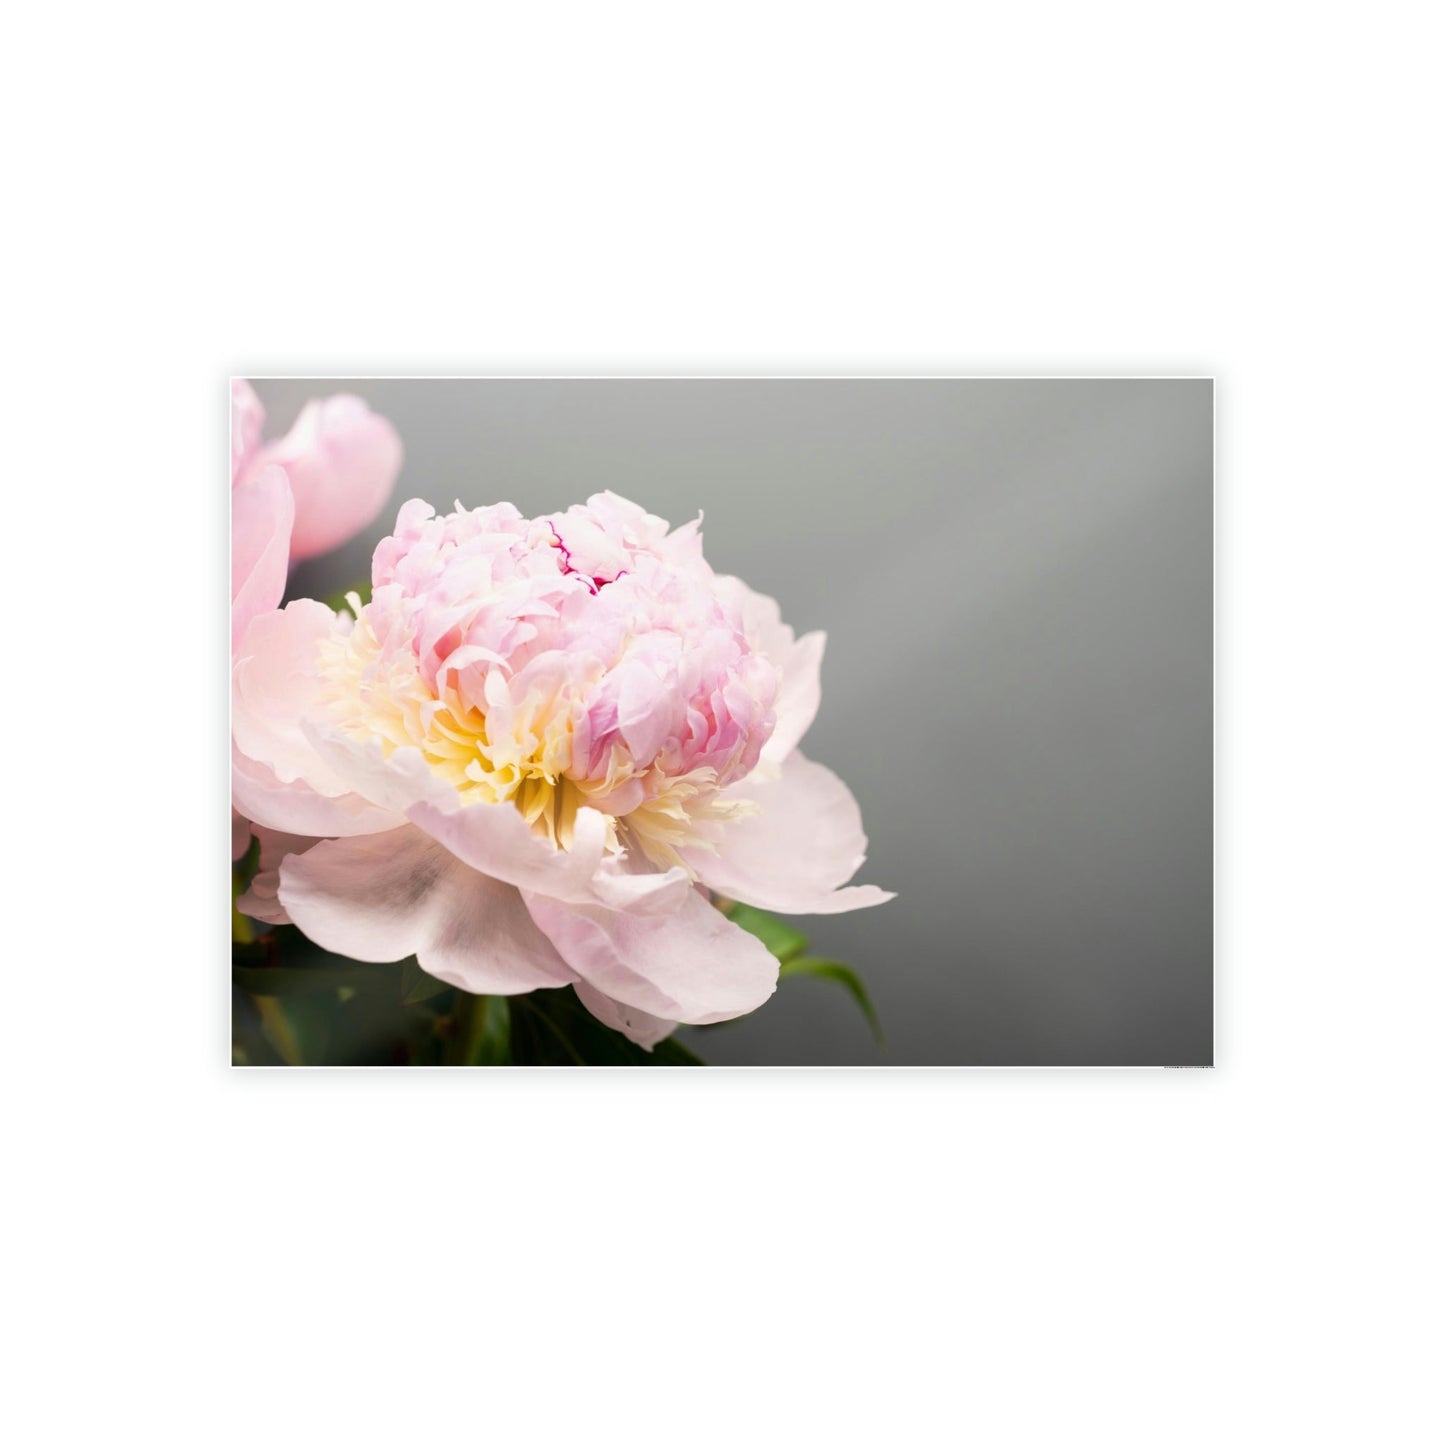 Peony Purity: A Bouquet of White